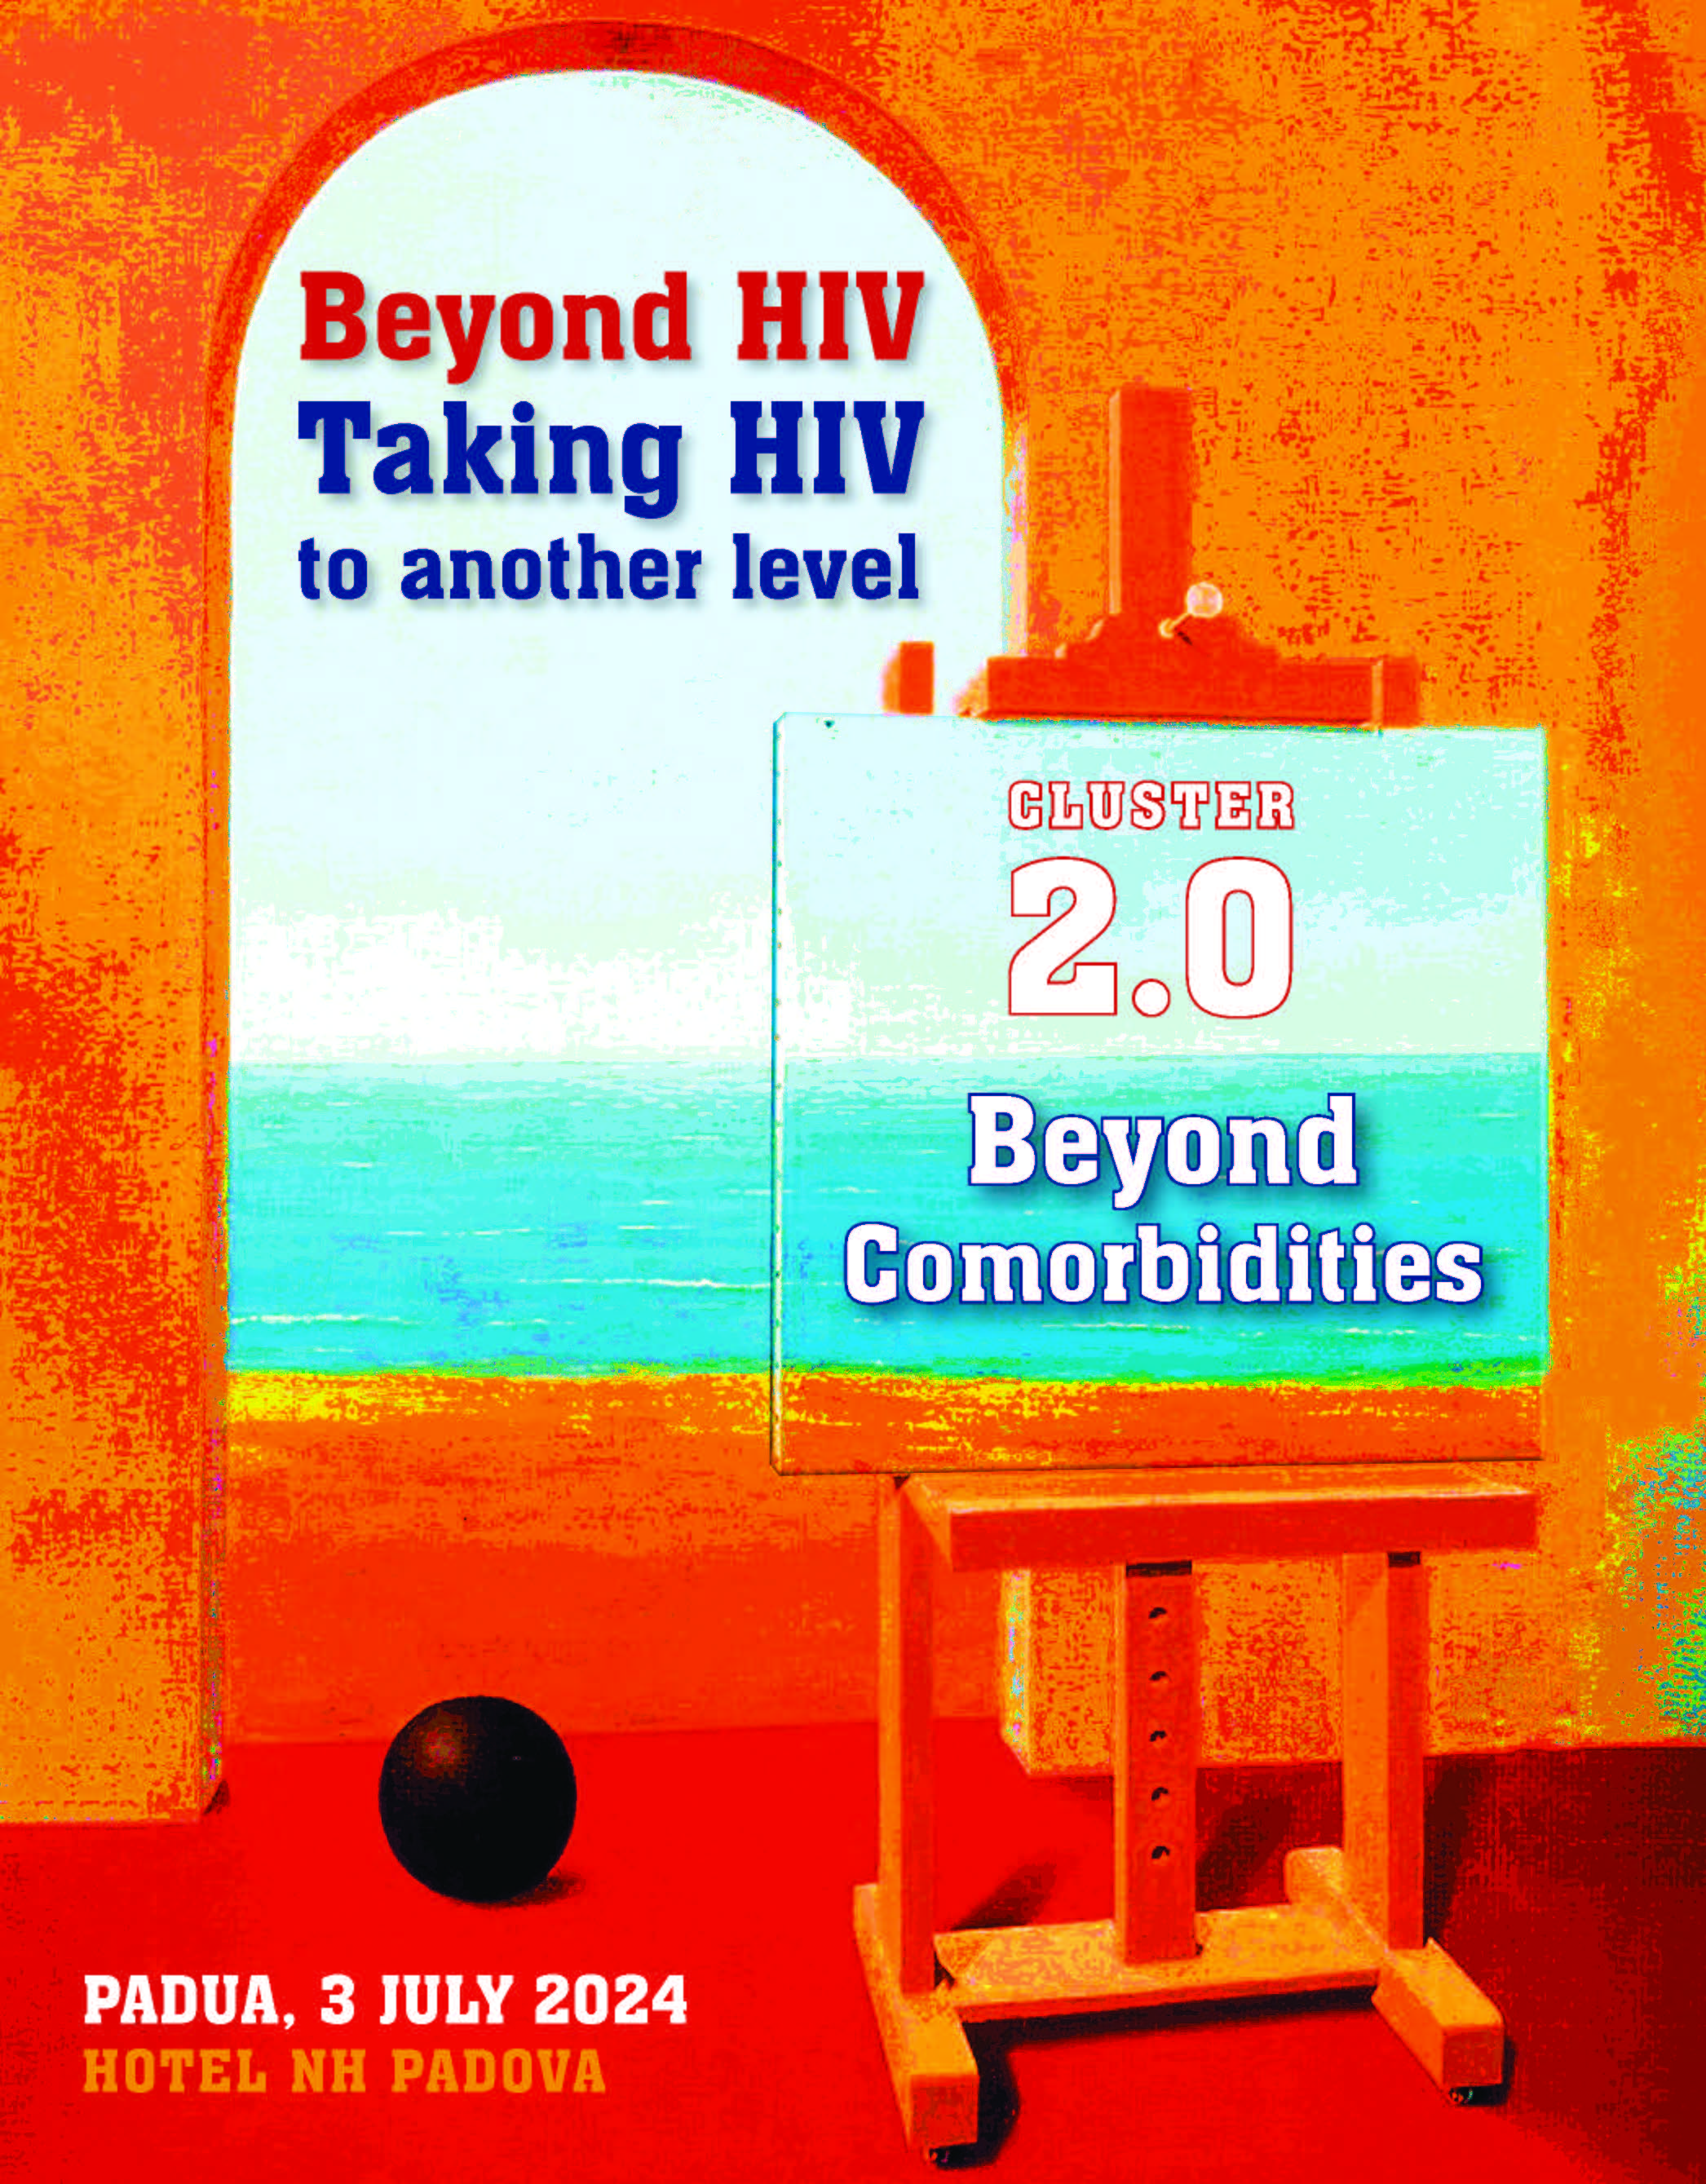 BEYOND HIV. TAKING HIV TO ANOTHER LEVEL CLUSTER 2.0 - BEYOND COMORBIDITIES